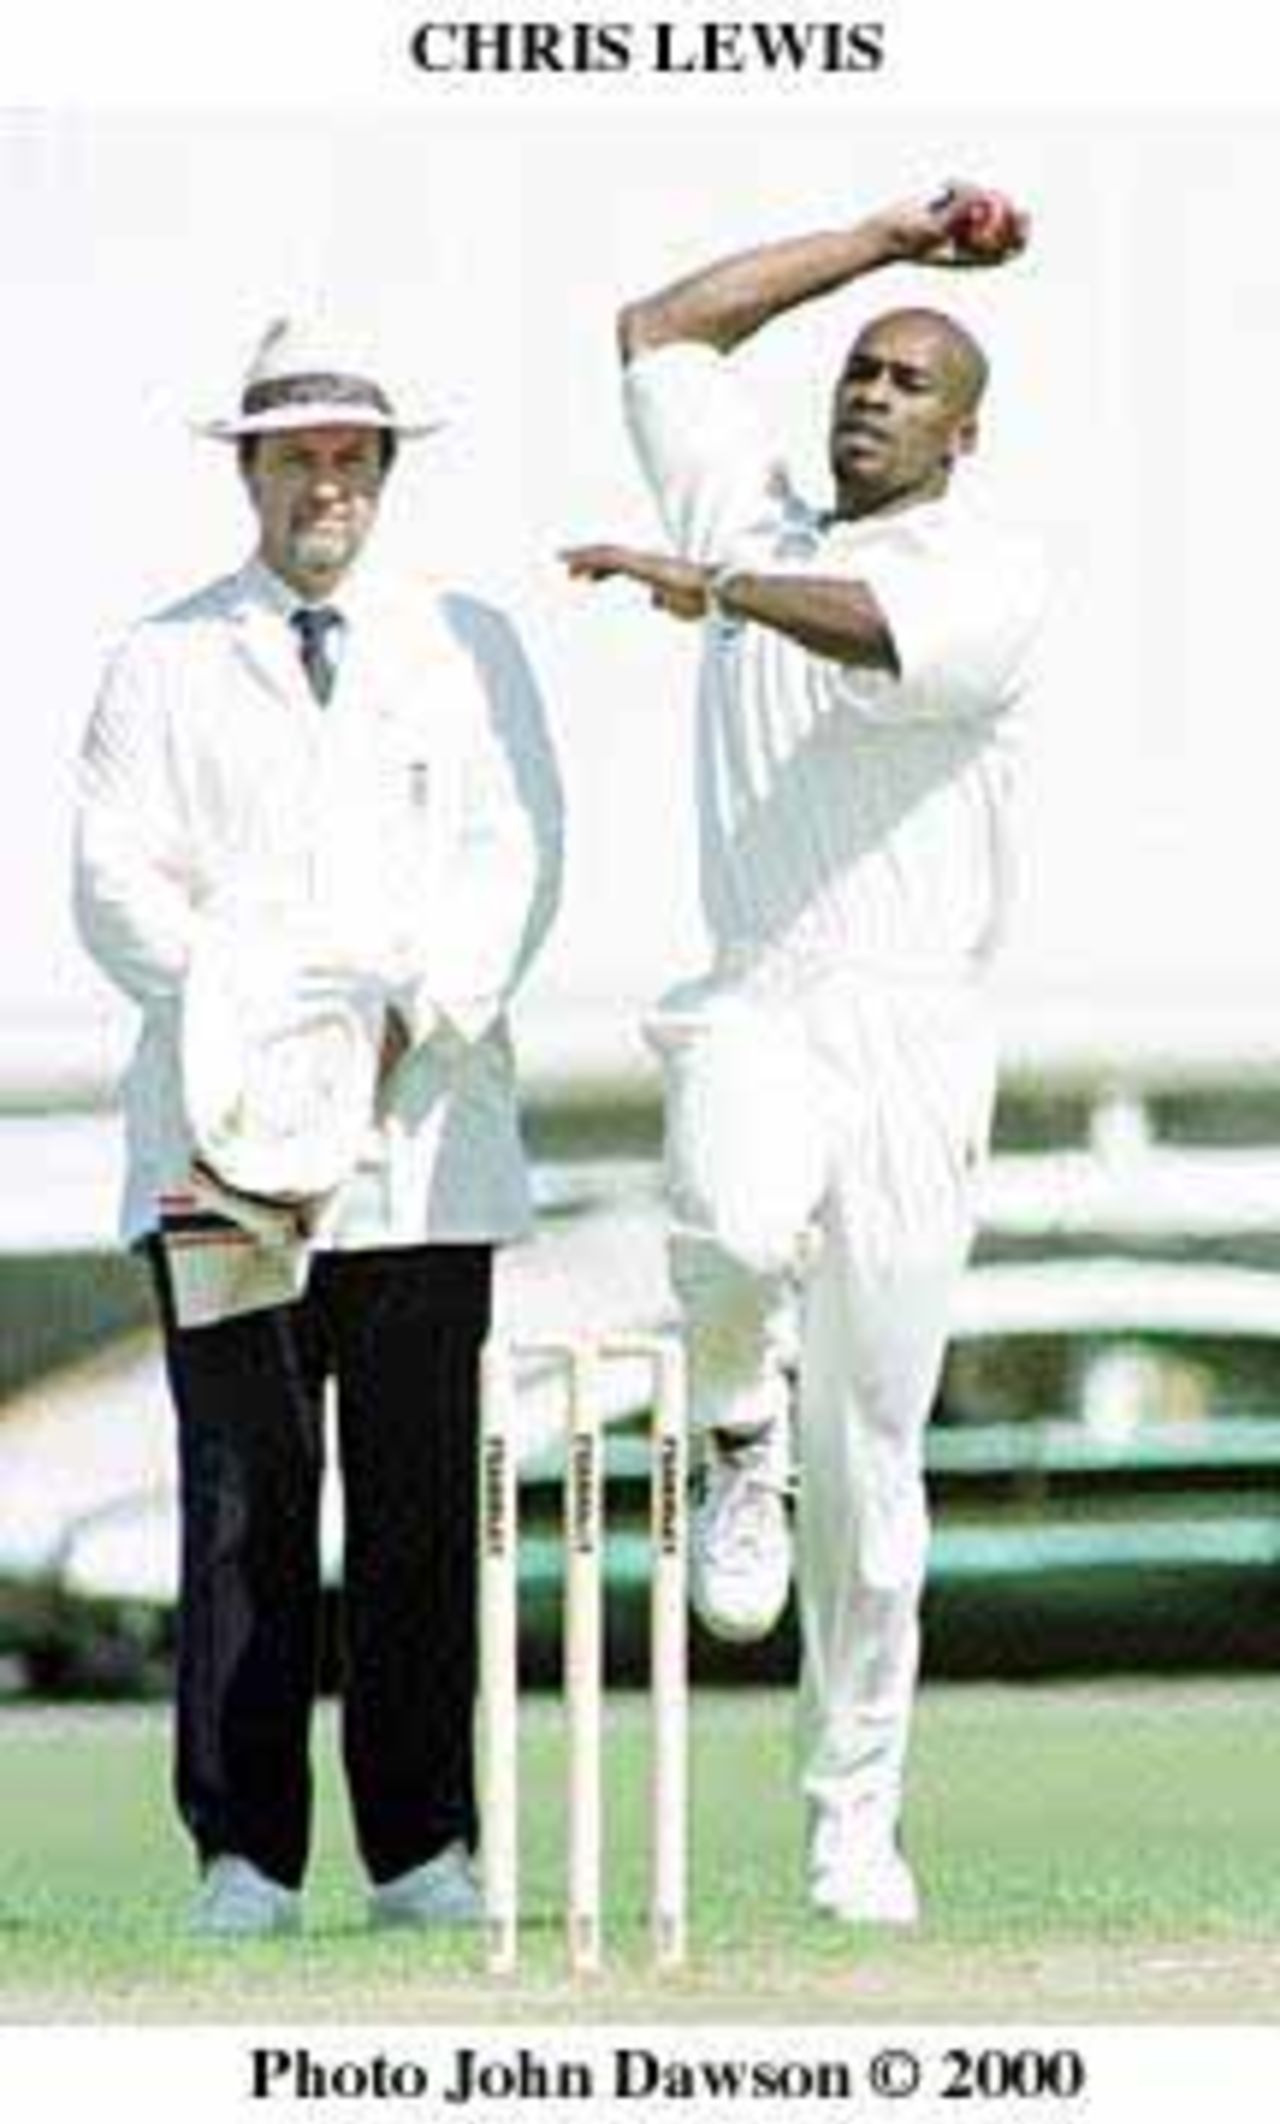 Lancs v Leics in the Benson and Hedges contest  23 April 2000 at Old Trafford